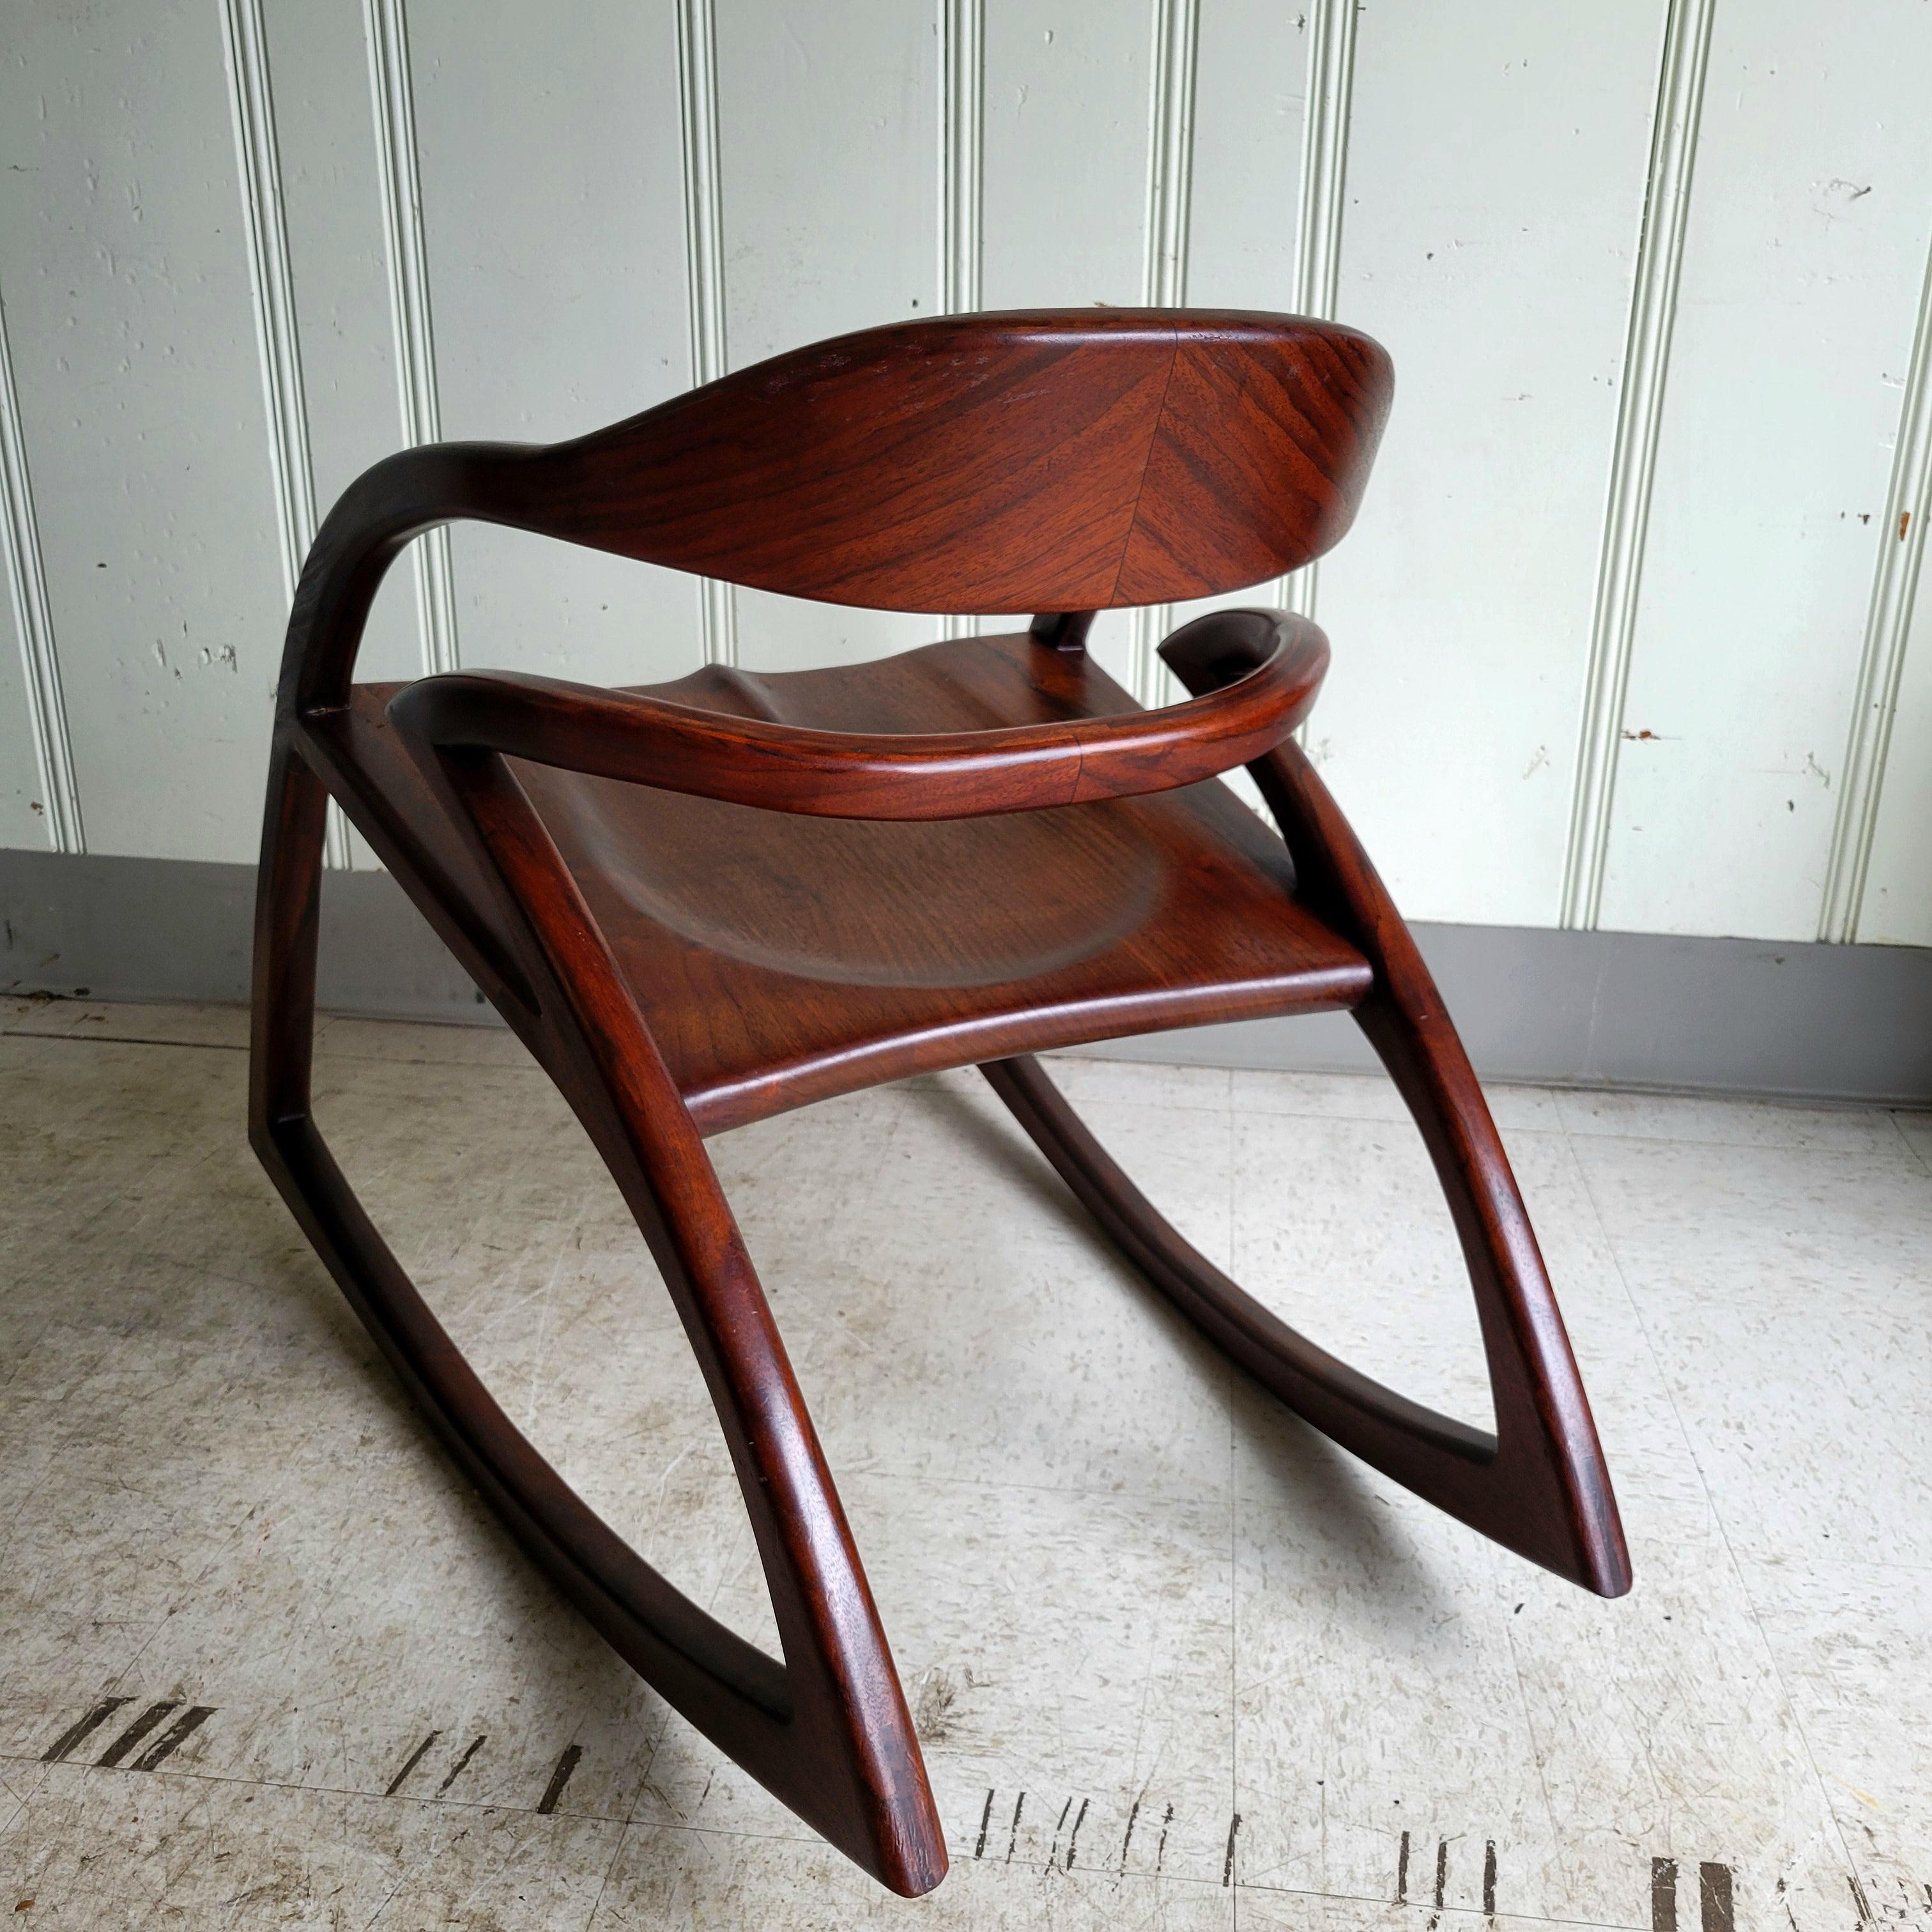 This rocker was handcrafted using Western black walnut using bent lamination for the back rails. Western black walnut is distinctive from other species of walnut in that is known for its highly figured body, variety of reds and purples and its